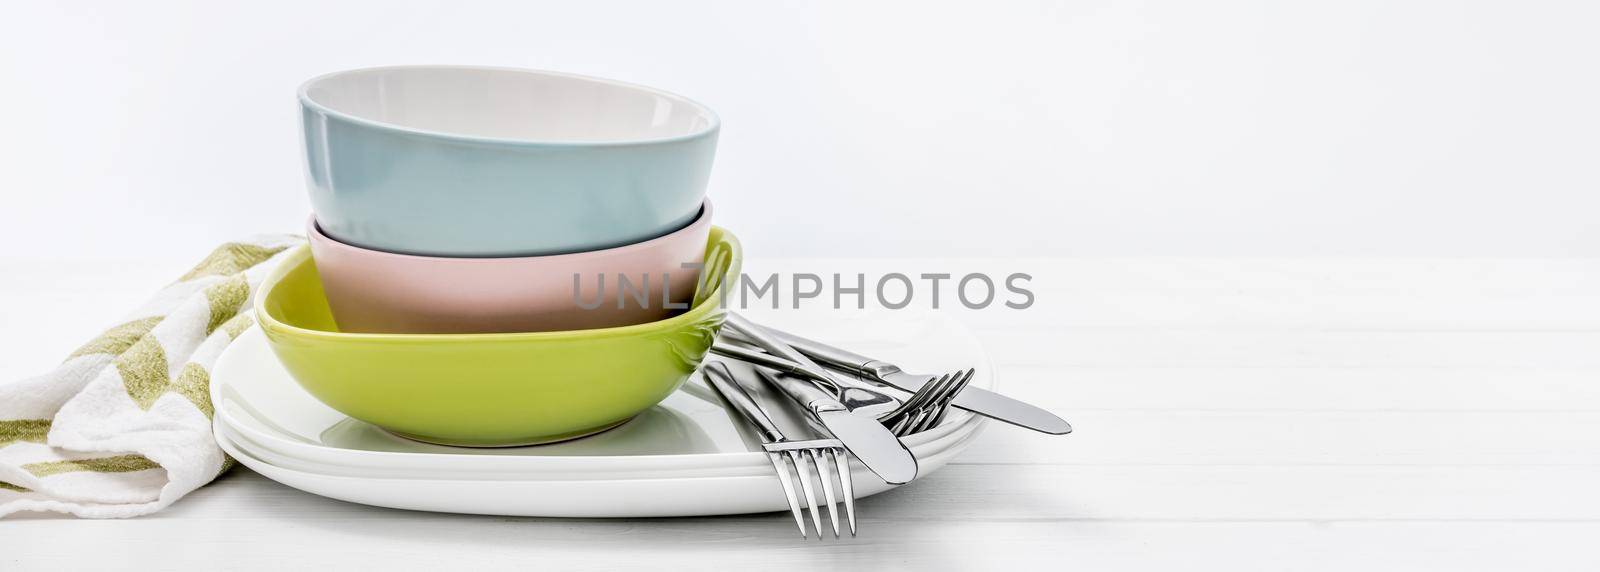 Ceramic bowls with silver cutlery by tan4ikk1